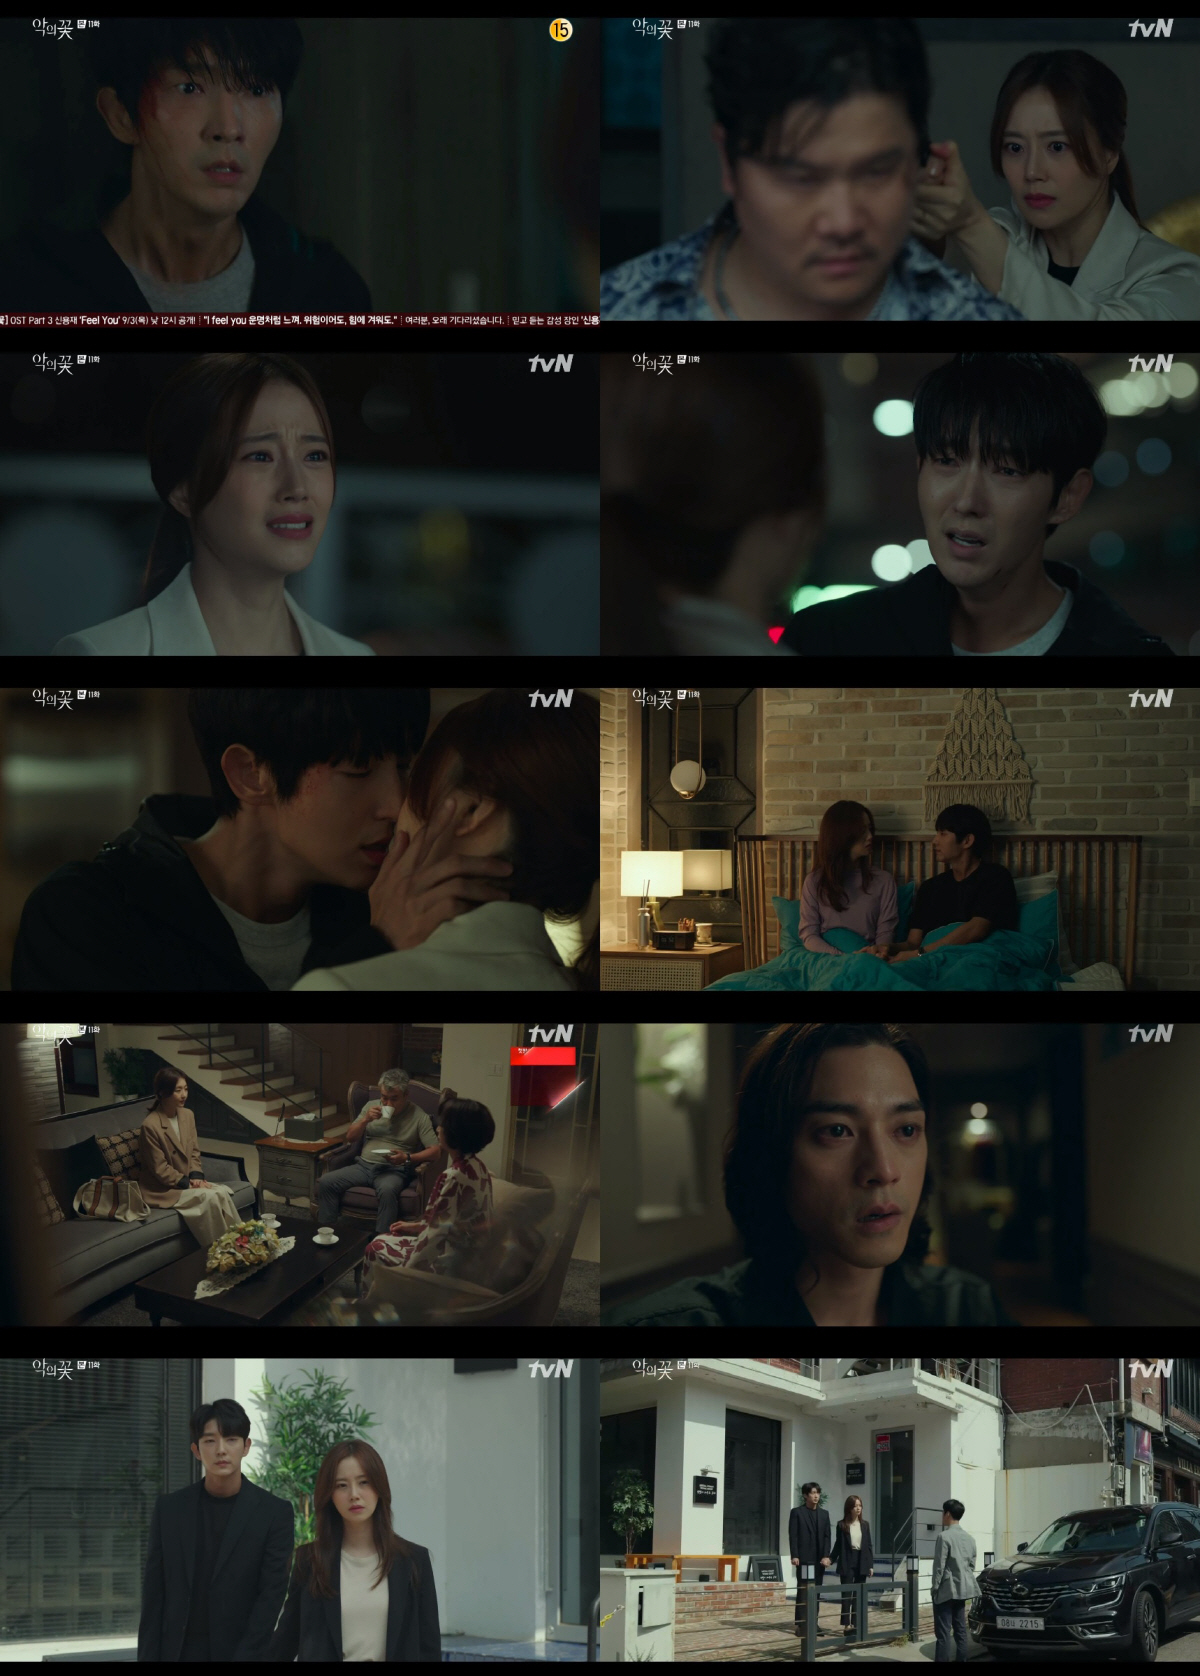 TVN tree Drama With the creepy reversal in Flower of Evil, Lee Joon-gi and Moon Chae-wons love of love was swept and imprinted the suspense melodies of the past.On this day, Do Hyun-soo (Lee Joon-gi) and Cha JiWon (Moon Chae-won) finally faced the truth that they crouched.The relationship between the two, who eventually chose to be with each other, was tainted with evil but eventually bloomed with love ().At the same time, the identity of Baek Hee-sung (Kim Ji-hoon), who was Mystery, was revealed as Accomplice of Do Min-seok (Choi Byung-mo), and the explosion to suspense, and the development without blinking with the melodrama was stirred.First, Cha JiWon asked his colleague, Detective Choi Jae-seop (Choi Young-joon), who learned the secret of Do Hyun-soo, to I will prove my life and prove him.At that time, Do Hyun-soos plan to unveil the Accomplice of the Jennifer 8 case in the performance and to work with the police to the human trafficking organization was in crisis as he was caught by the organization boss, Sang-cheol Kim.Just before Do Hyun-soo was tied up and lost his life, Detective Cha JiWon appeared to prevent Yeom Sang-cheol and put more sweat in his hands.The relief that she came to save Do Hyun-soo and the tension that she could not hide the fact that she knew the identity of Do Hyun-soo, the ambivalence between the drama and the drama spread at the same time.Do Hyun-soo was more confused by the appearance of Cha JiWon, who knew my identity but let go, but he struggled to avoid the police who were coming soon.Do Hyun-soo, who was running away, understood why Cha JiWon was acting hard and hurt, and his uncontrollable feelings were bouncing.In the end, Do Hyun-soo, who stood in front of Cha JiWon again, cried for the first time, saying, Im sorry.This was the moment when he thought that no one had told him, but clearly expressed the emotion that existed in him.Do Hyun-soo asked Cha JiWon for forgiveness, who knew everything but believed, and she also cried tears without hesitation, saying, I just had to do it.The two, who knew that they could no longer return to their happy daily lives, hugged each other in silence and kissed each other sadly.In addition, Do Hyun-soo confided in my real life that I had hidden in the meantime, and I made a deep echo to Cha JiWon with a confession of I love you but with a heartfelt heart.In addition, the real Baek Hee-sung, who borrowed his identity, was revealed as Activity Jennifer 8 incident by Do Hyun-soo, and it was shocked.Do Hae-soo (played by Jang Hee-jin) testified that his left fingernail was exceptionally short, and Baek Hee-sung, who stopped biting his fingernails, overlapped, and his eyes, which were flashing with madness and living, were so creepy that they made his hair become numb.In the morning of the incident, Do Hyun-soo and Cha JiWon stood in front of Detective Choi Jae-seop, who came to arrest Do Hyun-soo with their hands tightly held.Now, the two people who have faced a sick love are wondering whether they will meet again and how Baek Hee-sung will move in the narrowing track.Viewers also were shocked that Do Hyun-soo, Cha JiWon please be happy, I watched the breath throughout the broadcast, It was legend today, I watched together, Actors acted, Accomplice was Kim Ji-hoon.The smoke is also creepy, and he poured out a hot response.On the other hand, Baek Hee-sung (Do Hyun-soo), a man who played love, and his wife Cha JiWon, who started to doubt his reality, and the TVN drama The Flower of Evil, which is a high-density emotional tracing of two people facing the truth that they want to ignore, will visit viewers on a special broadcast at 10:50 pm on the 3rd (Thursday) night, and the 12th will be broadcast at 10:50 pm on the 9th (Wed).